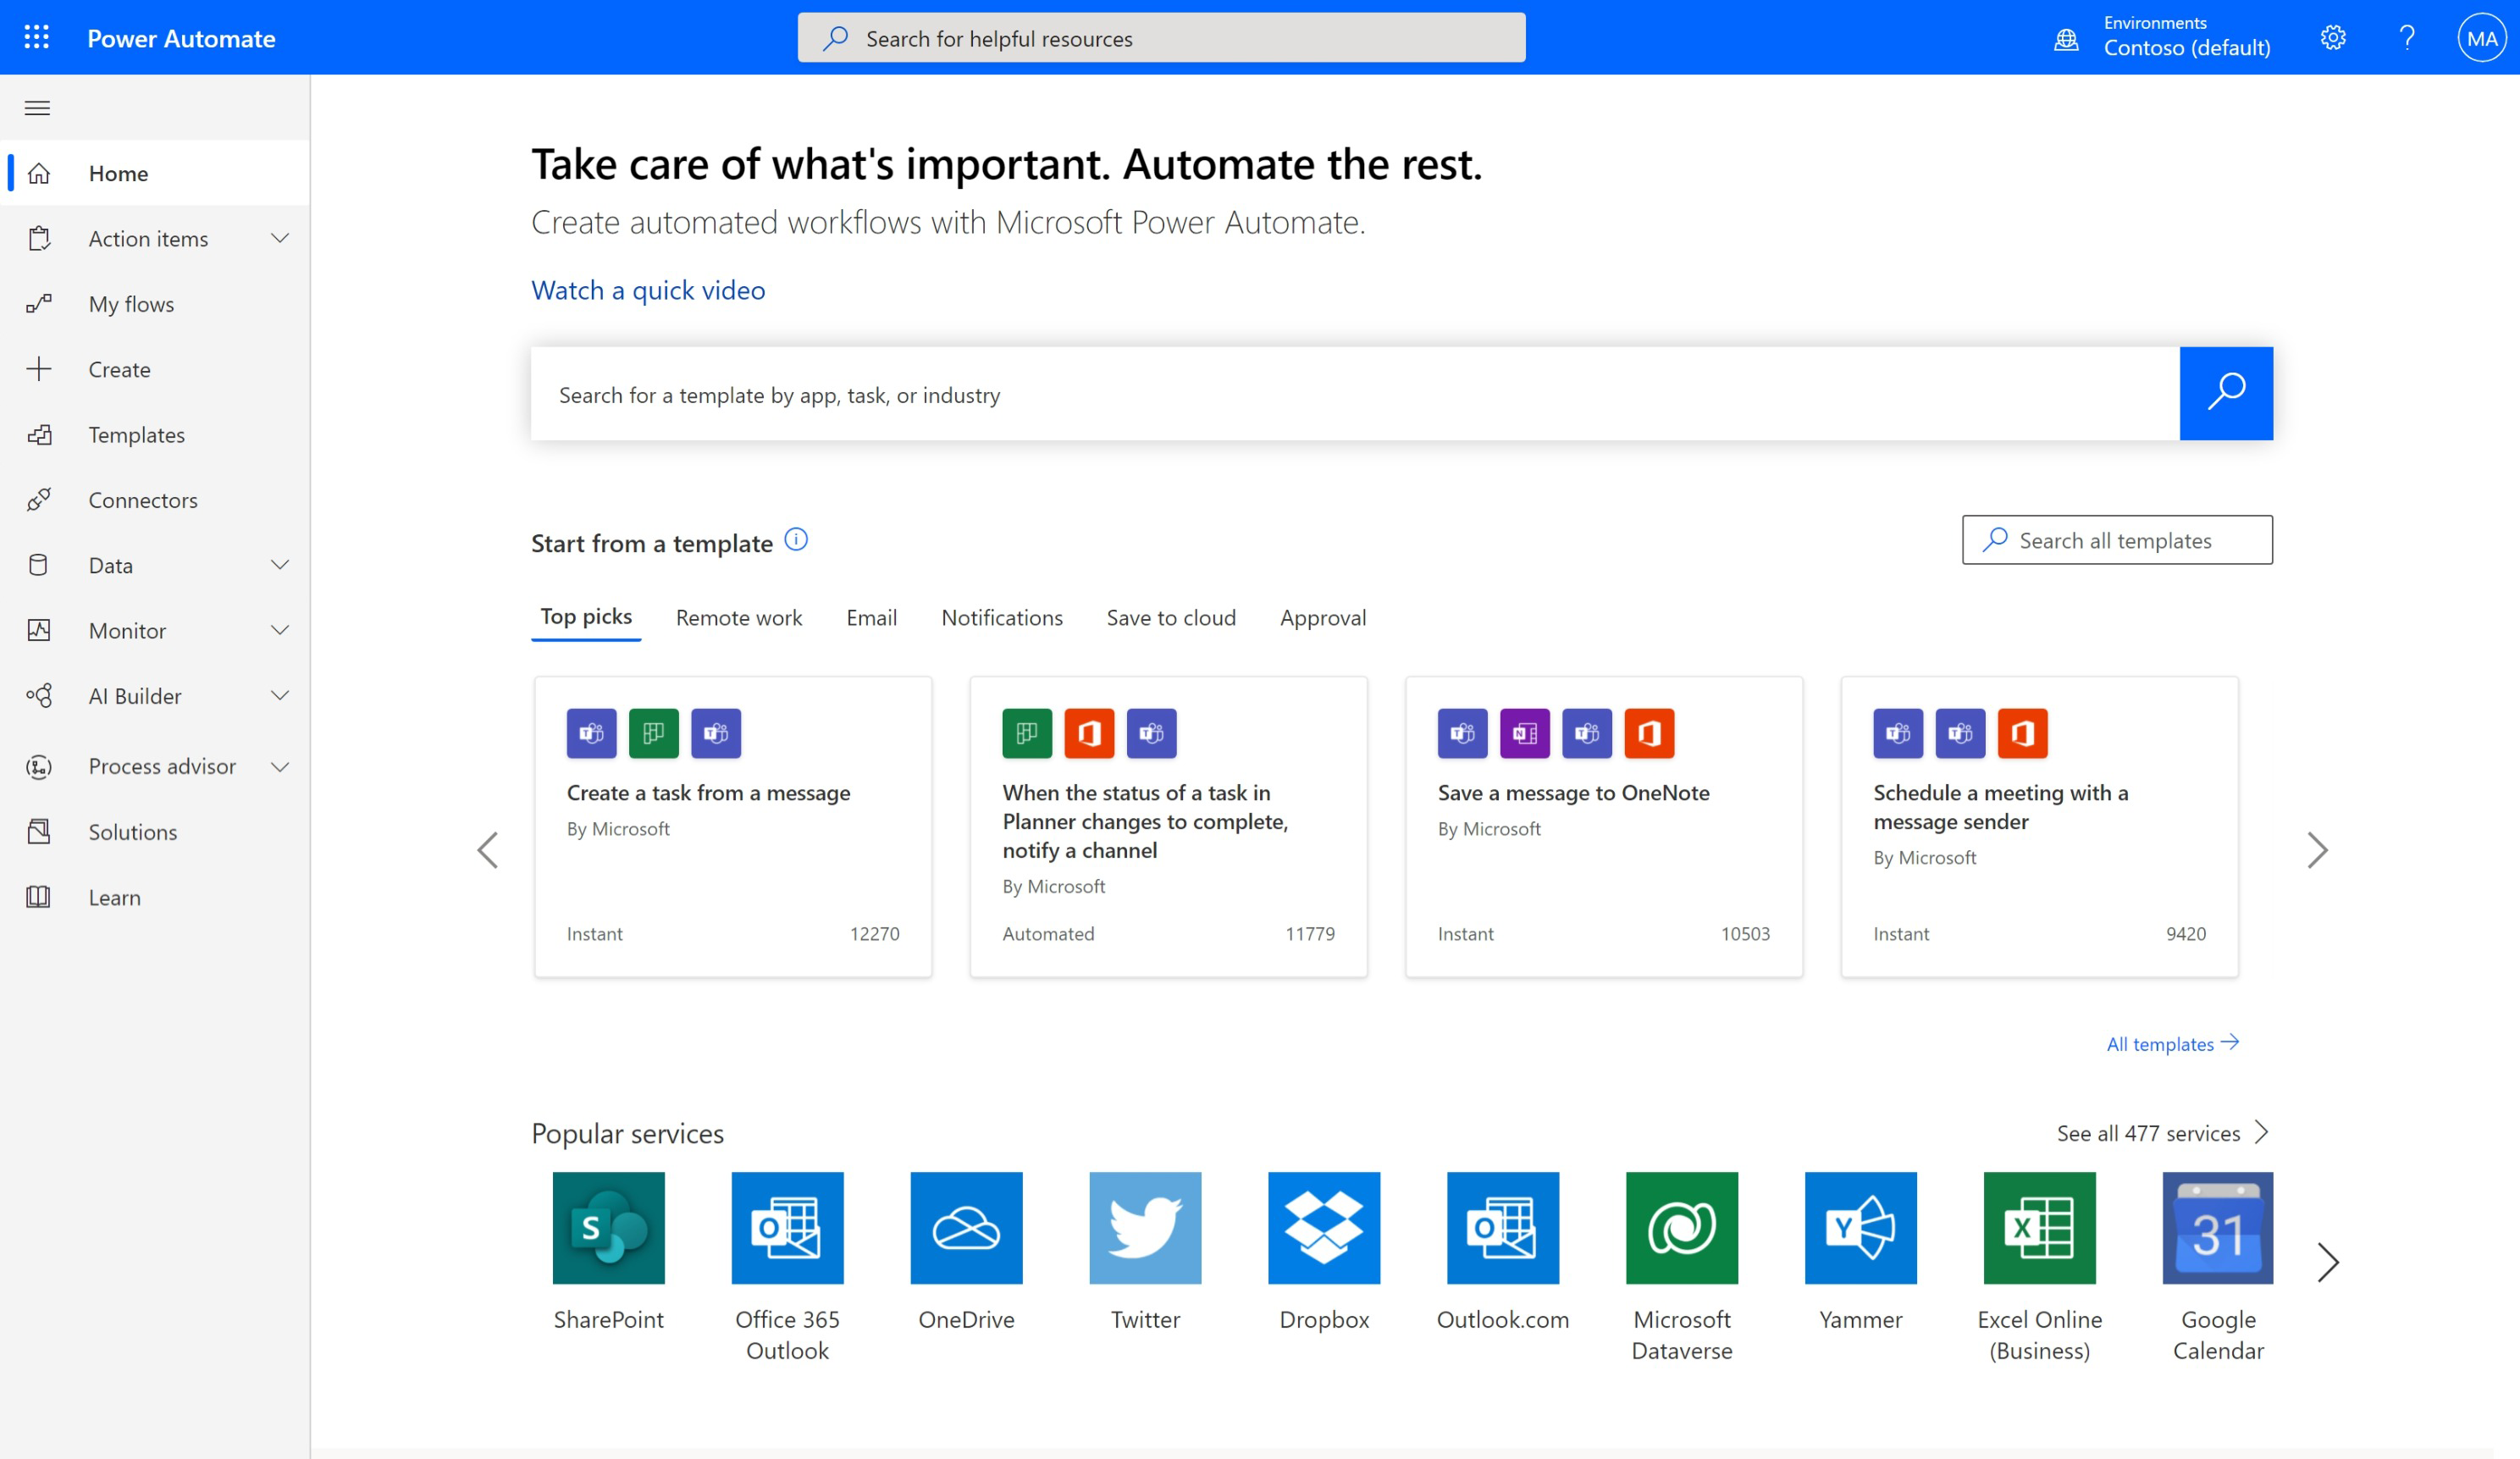 How Does Power Automate Work With Microsoft 365 Apps